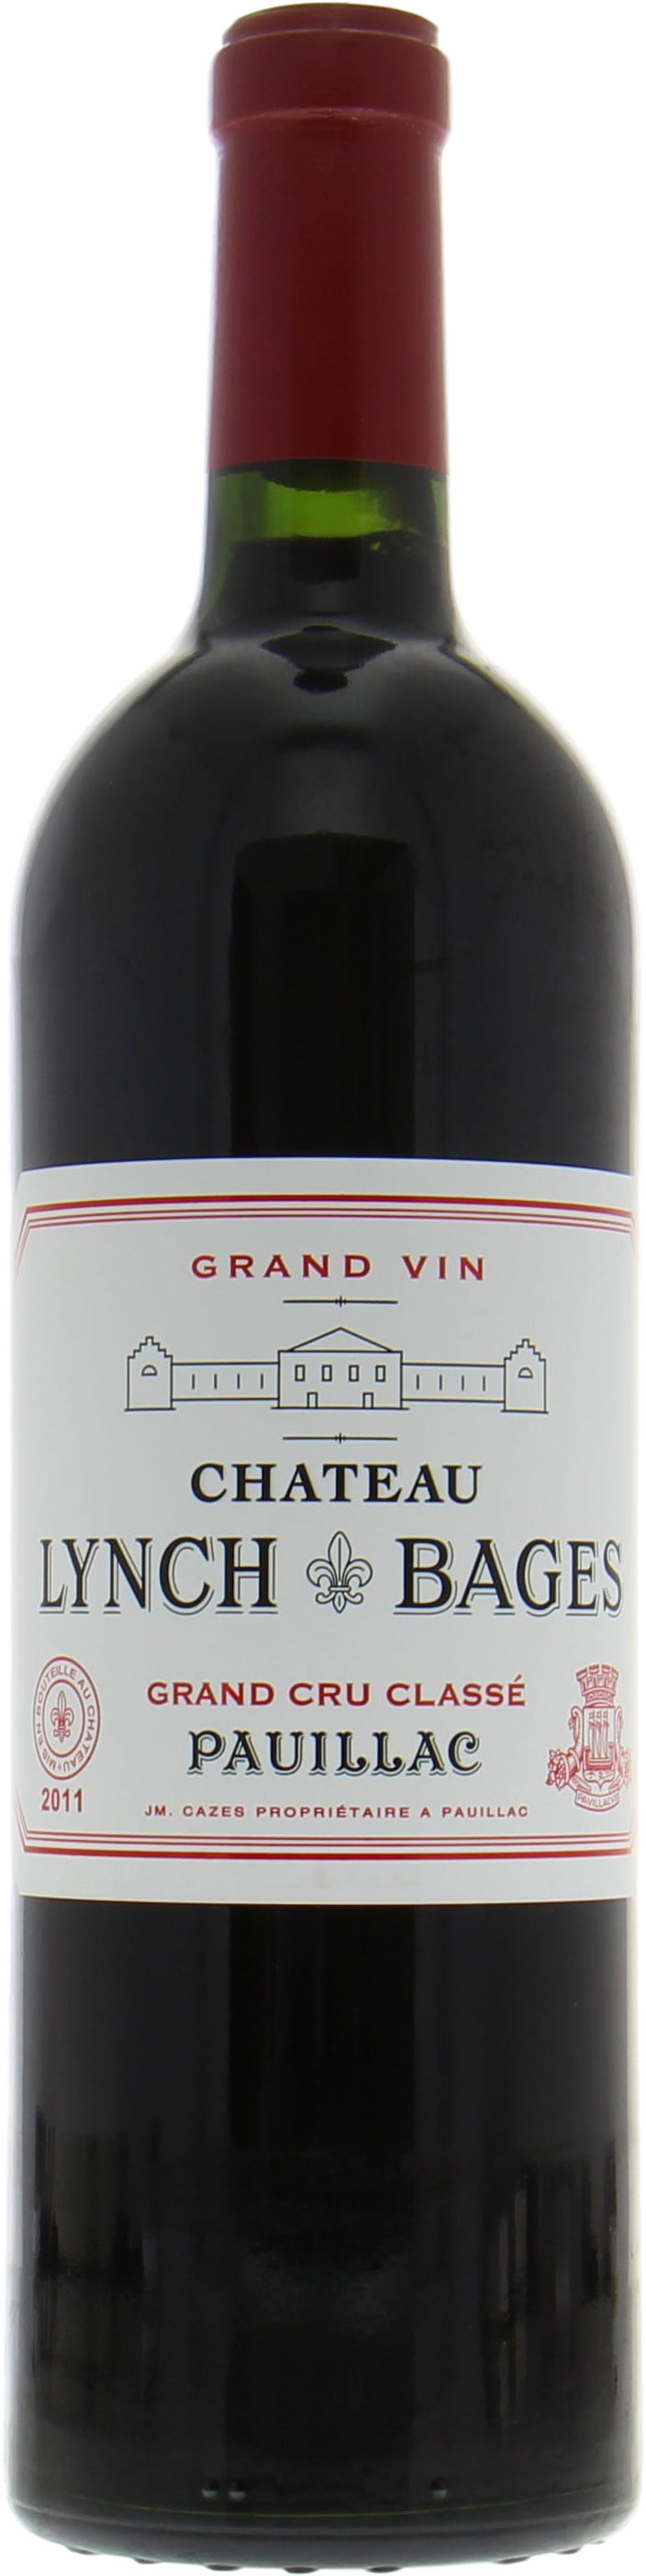 Chateau Lynch Bages - Chateau Lynch Bages 2011